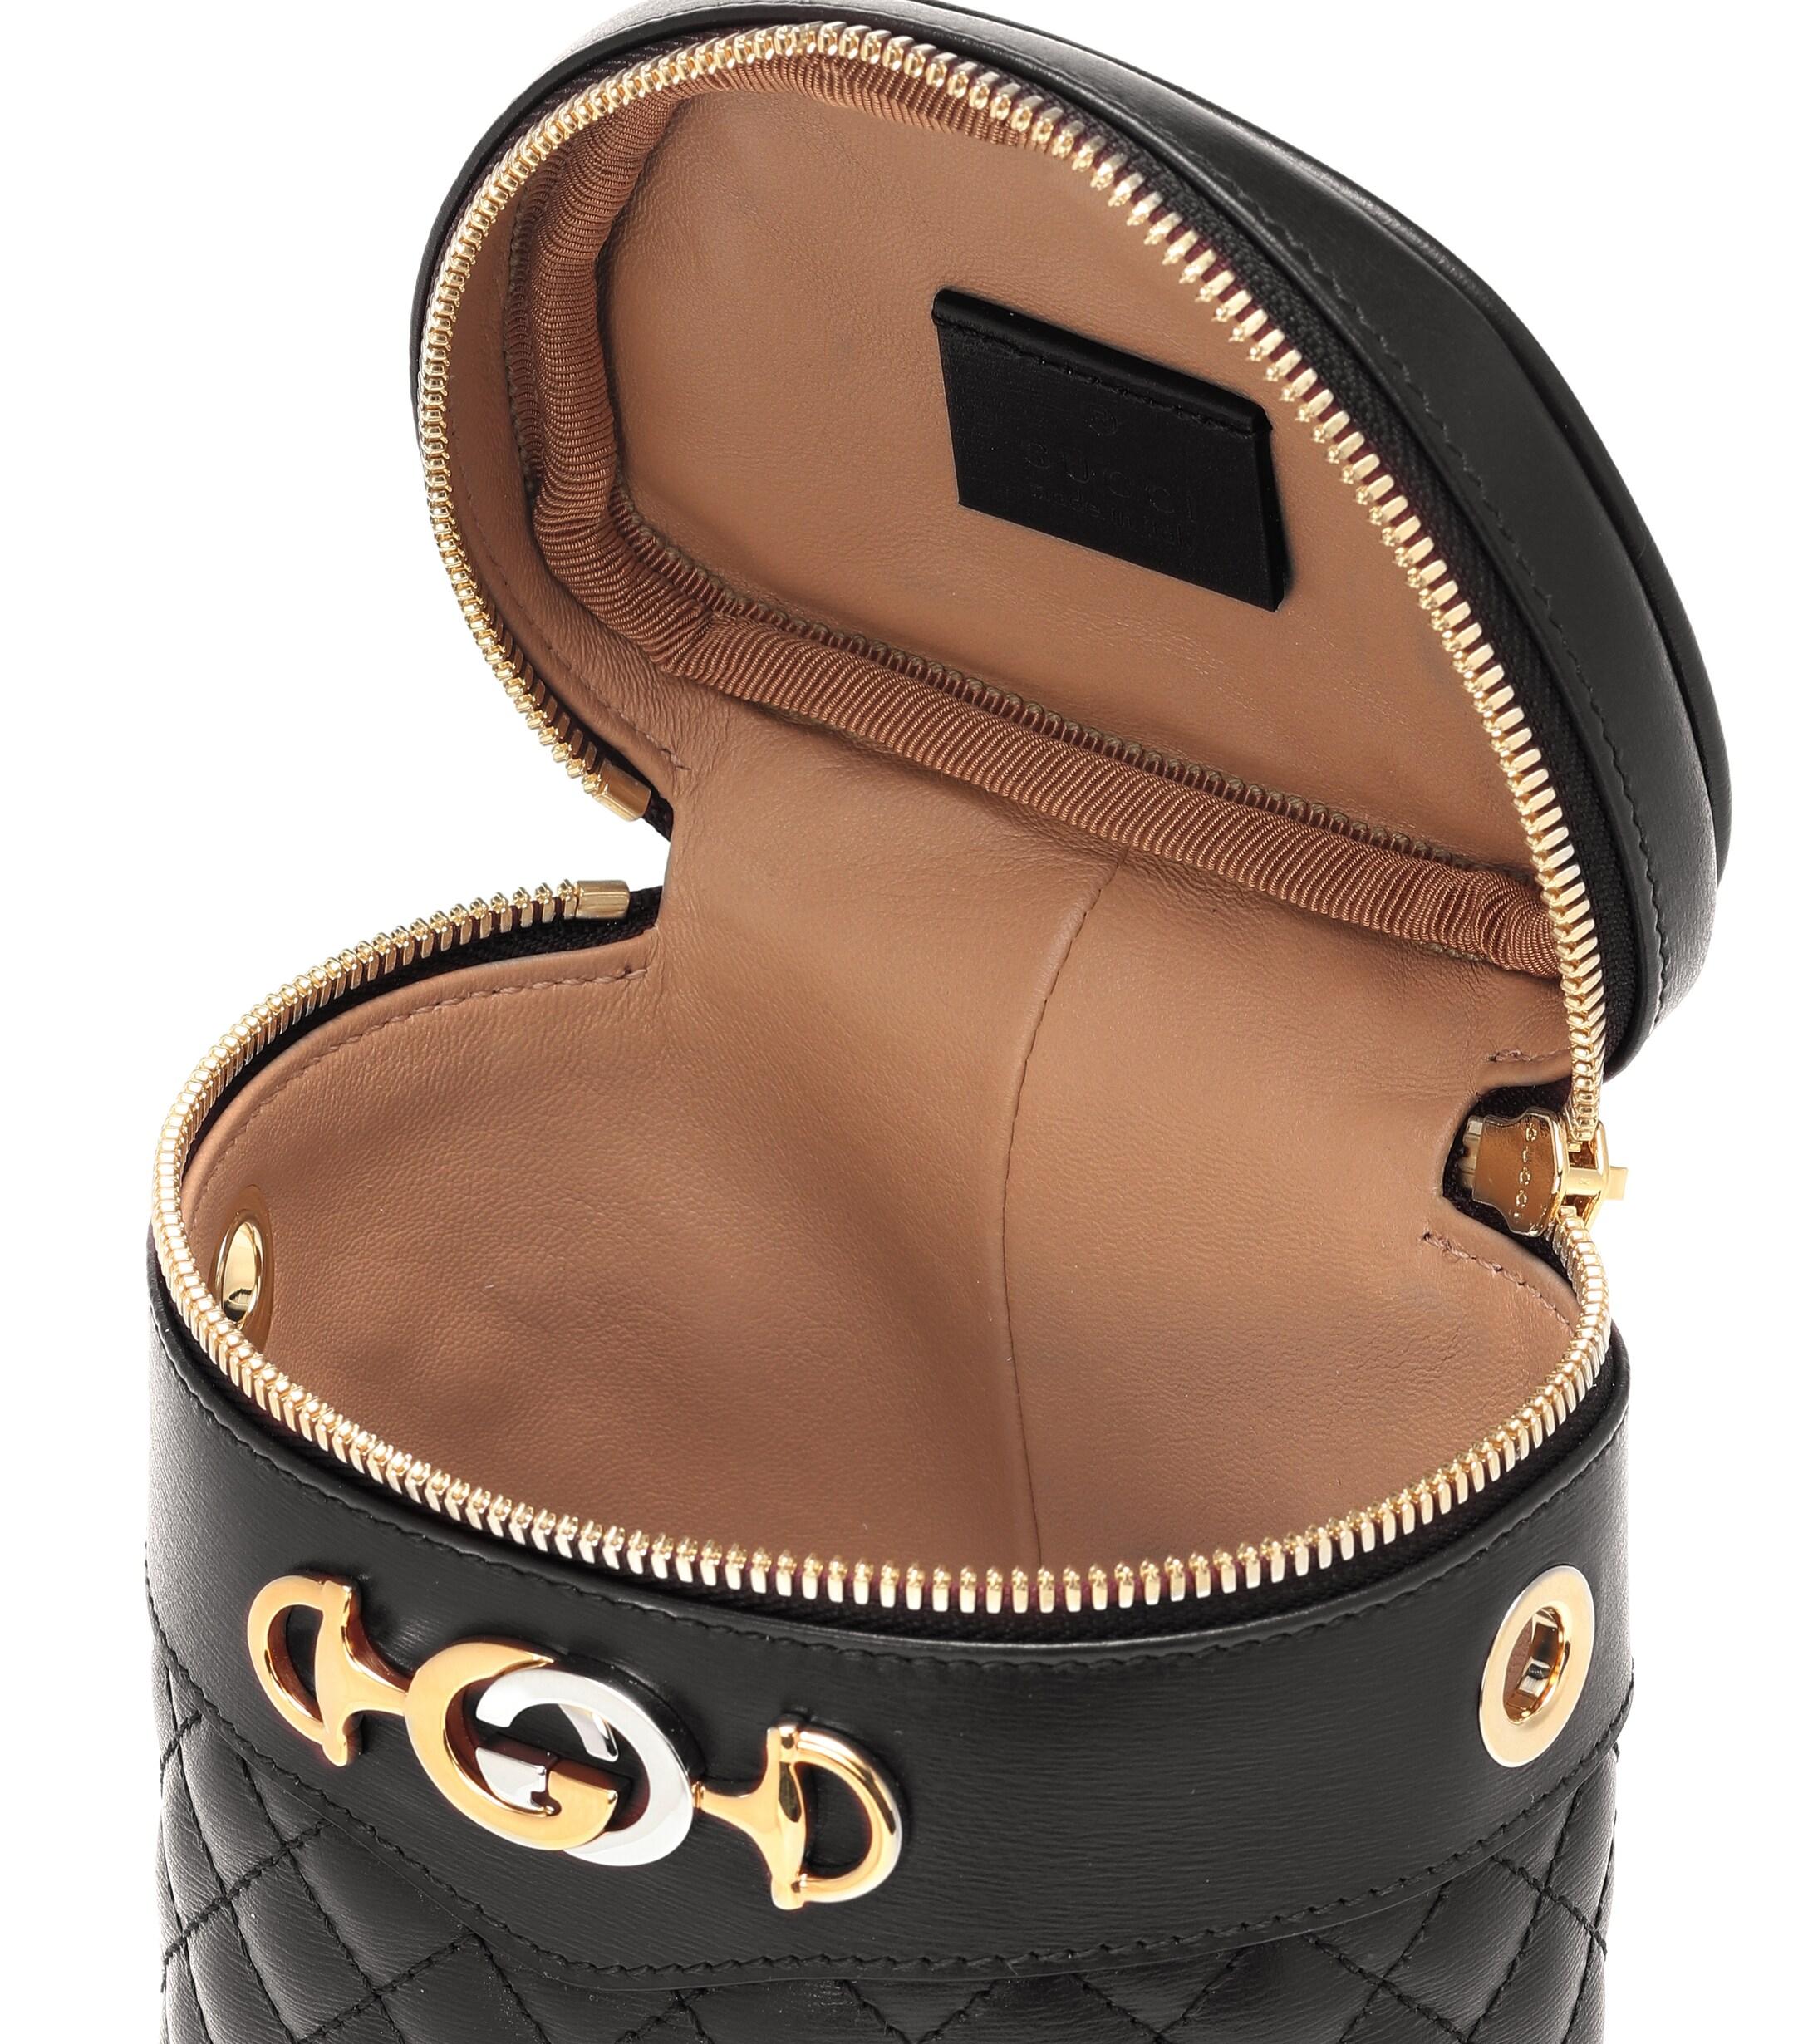 Gucci Quilted Leather Belt Bag in Black - Lyst